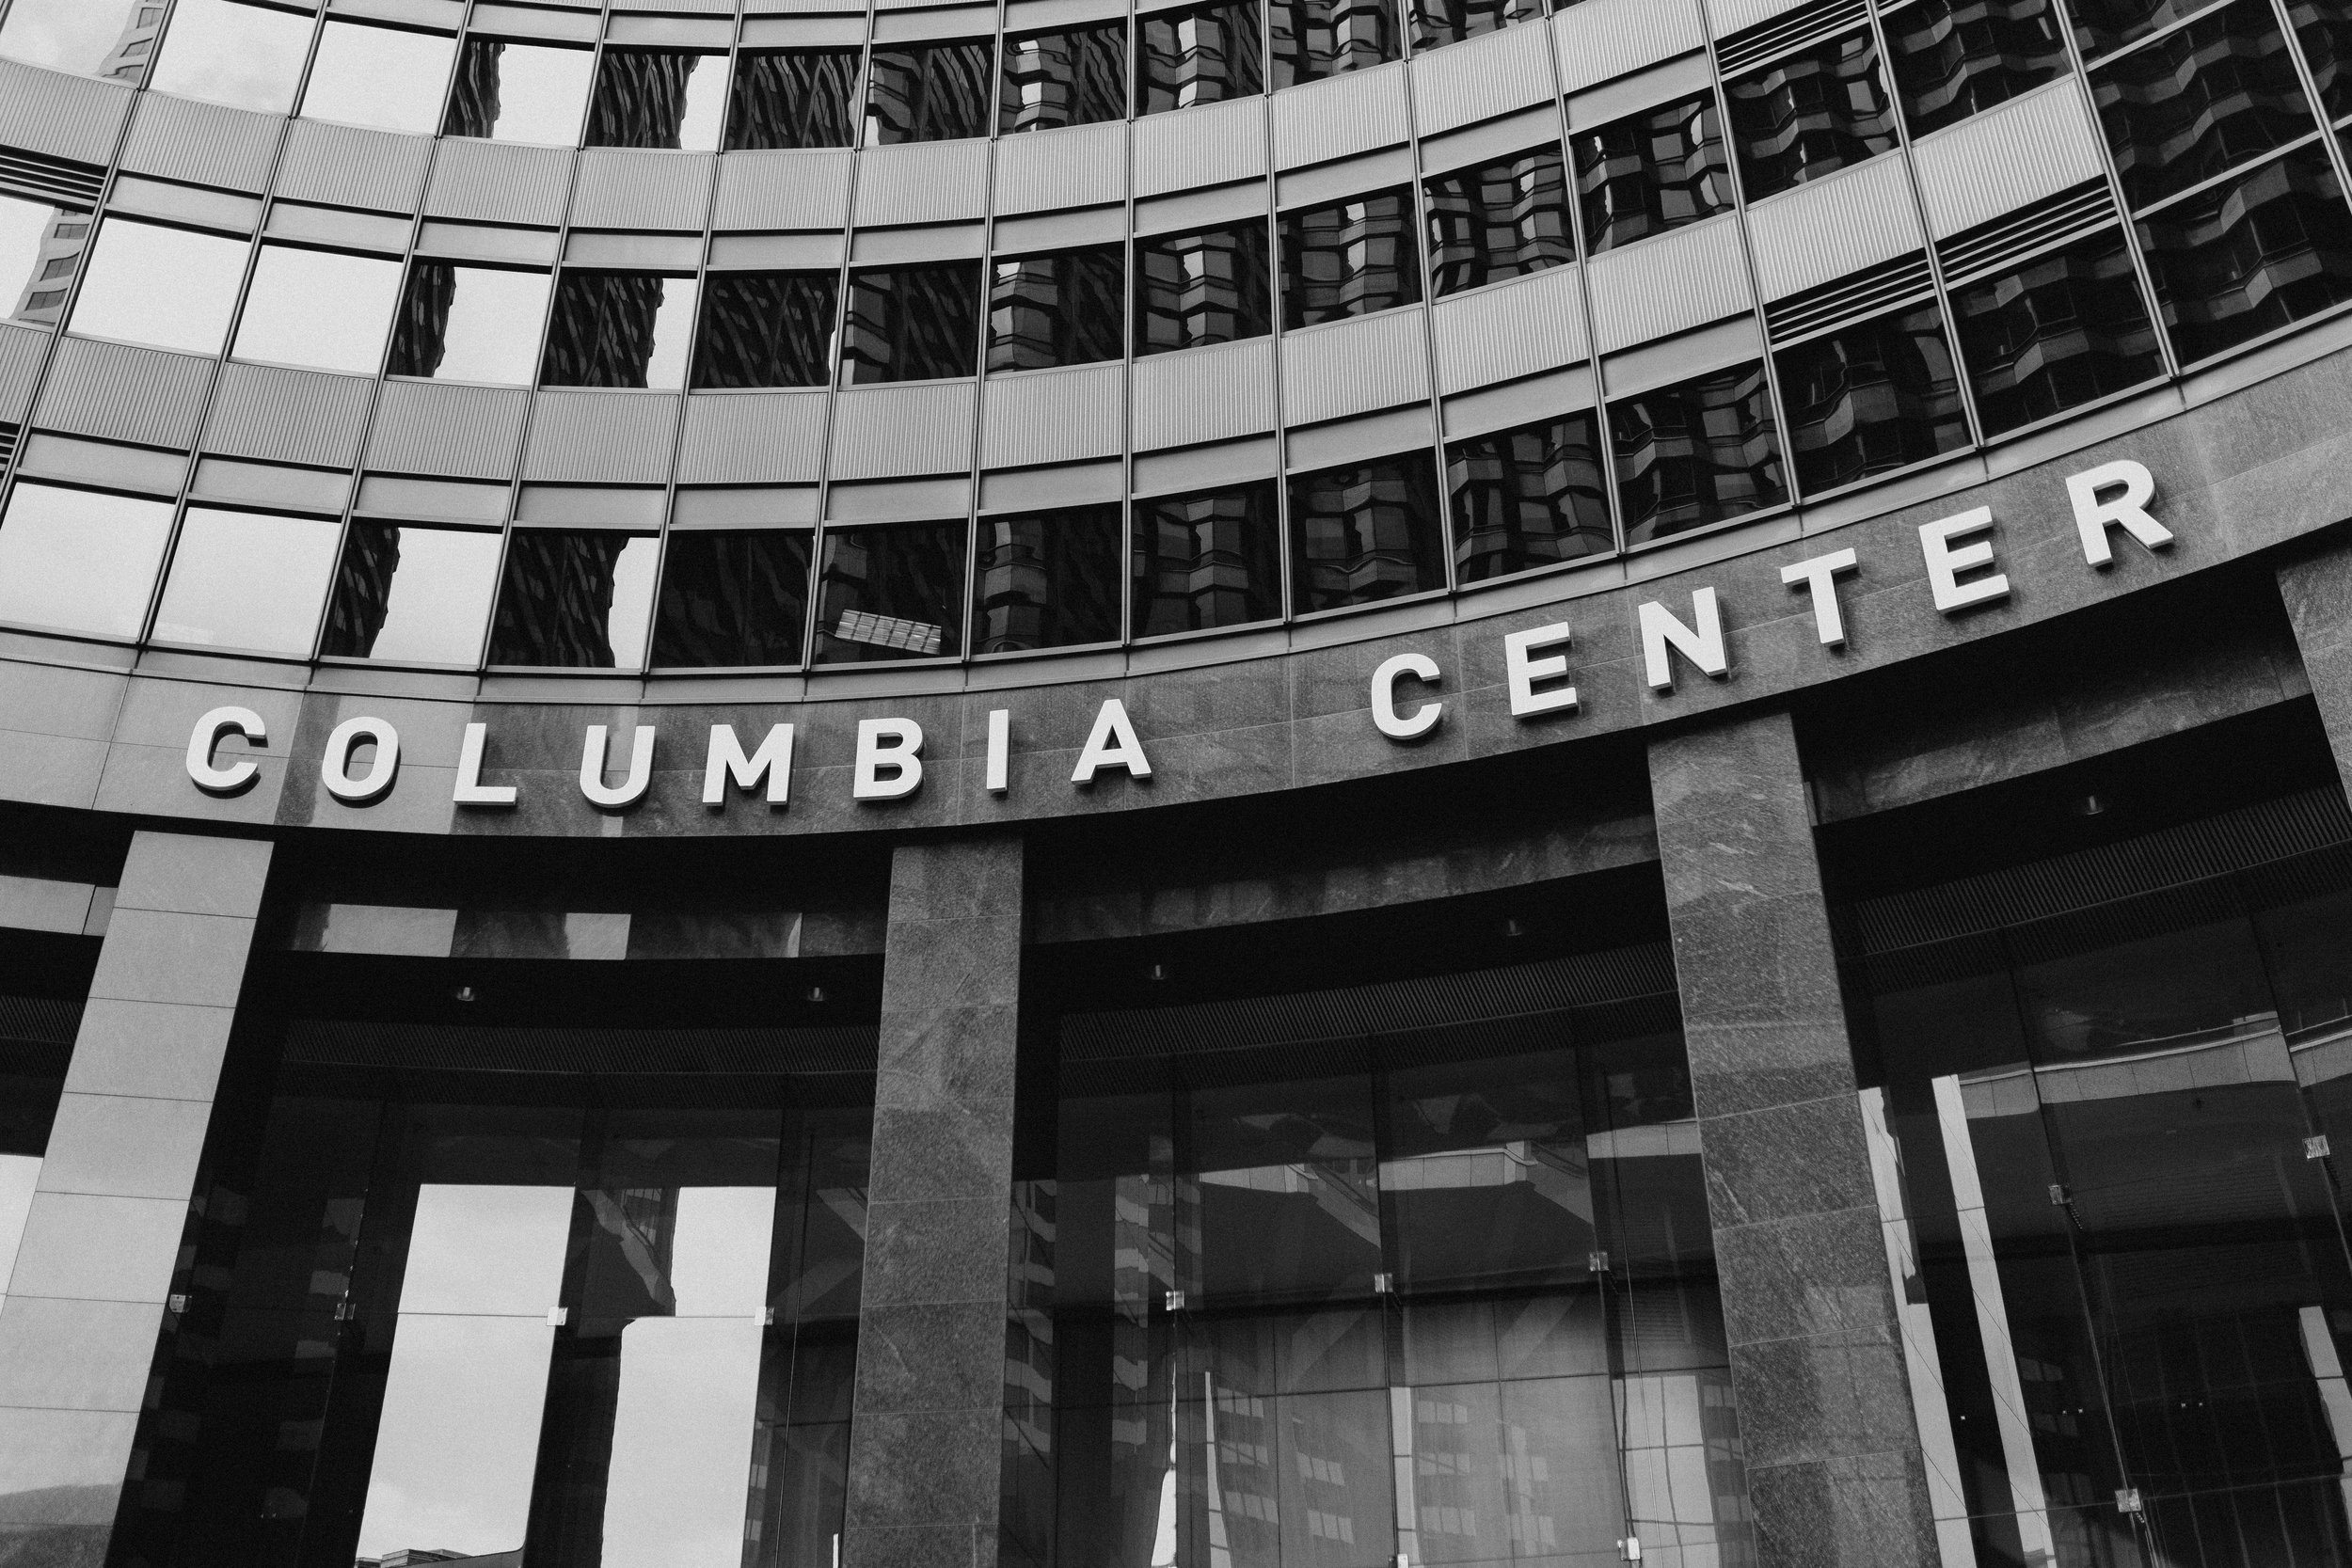  Black and white image of the facade of a building. A sign above the entrance reads “Columbia Center” 